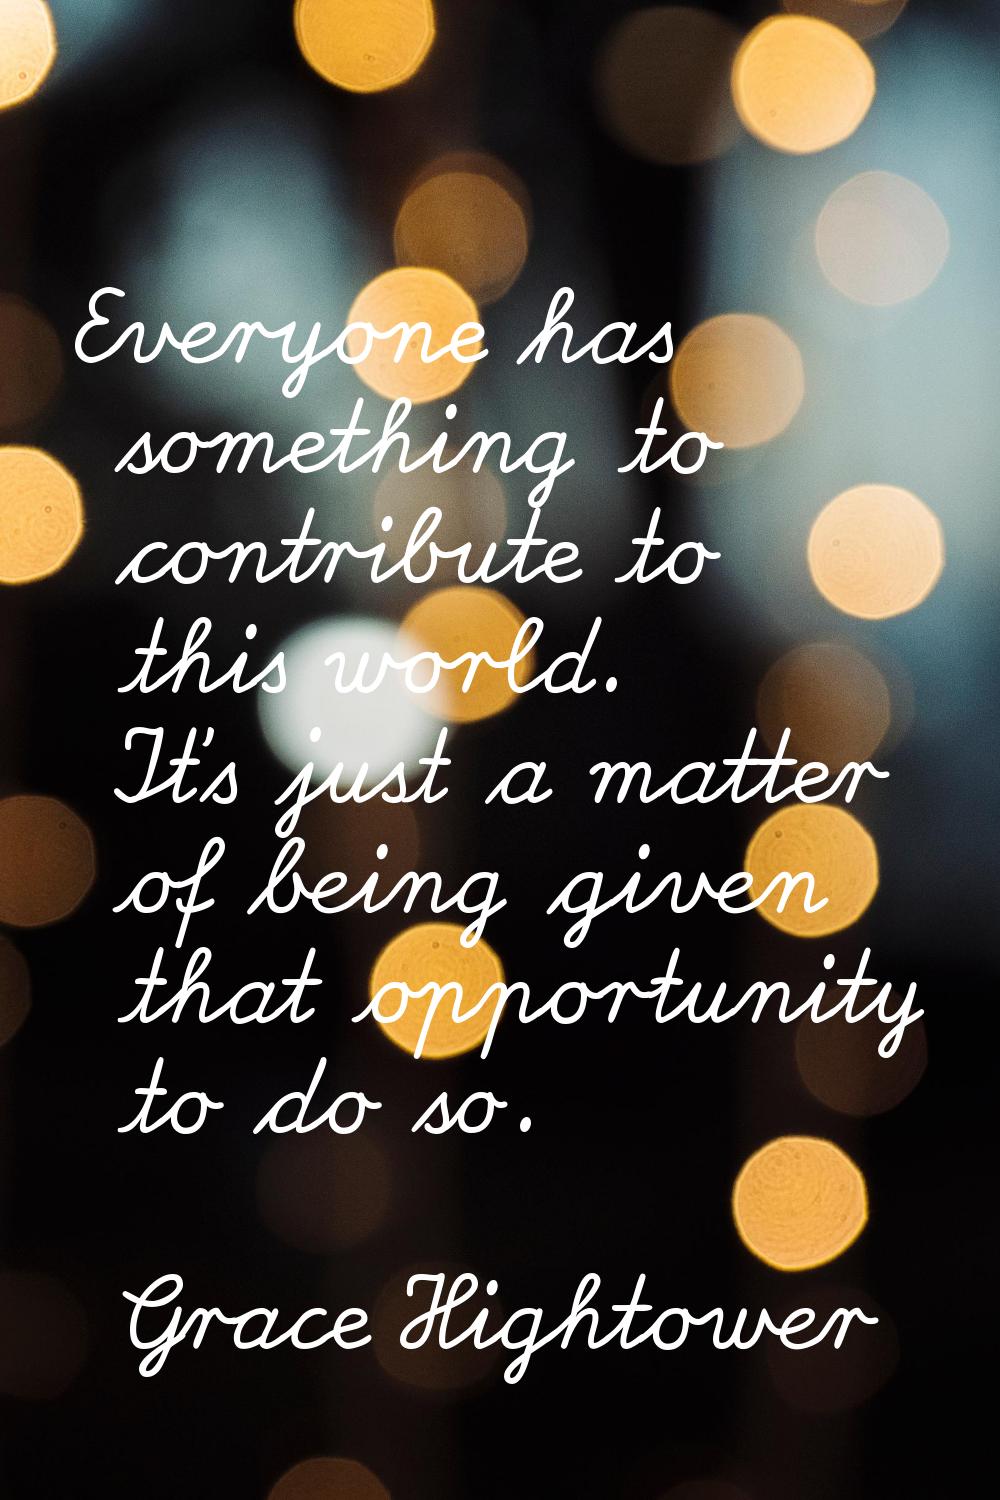 Everyone has something to contribute to this world. It's just a matter of being given that opportun